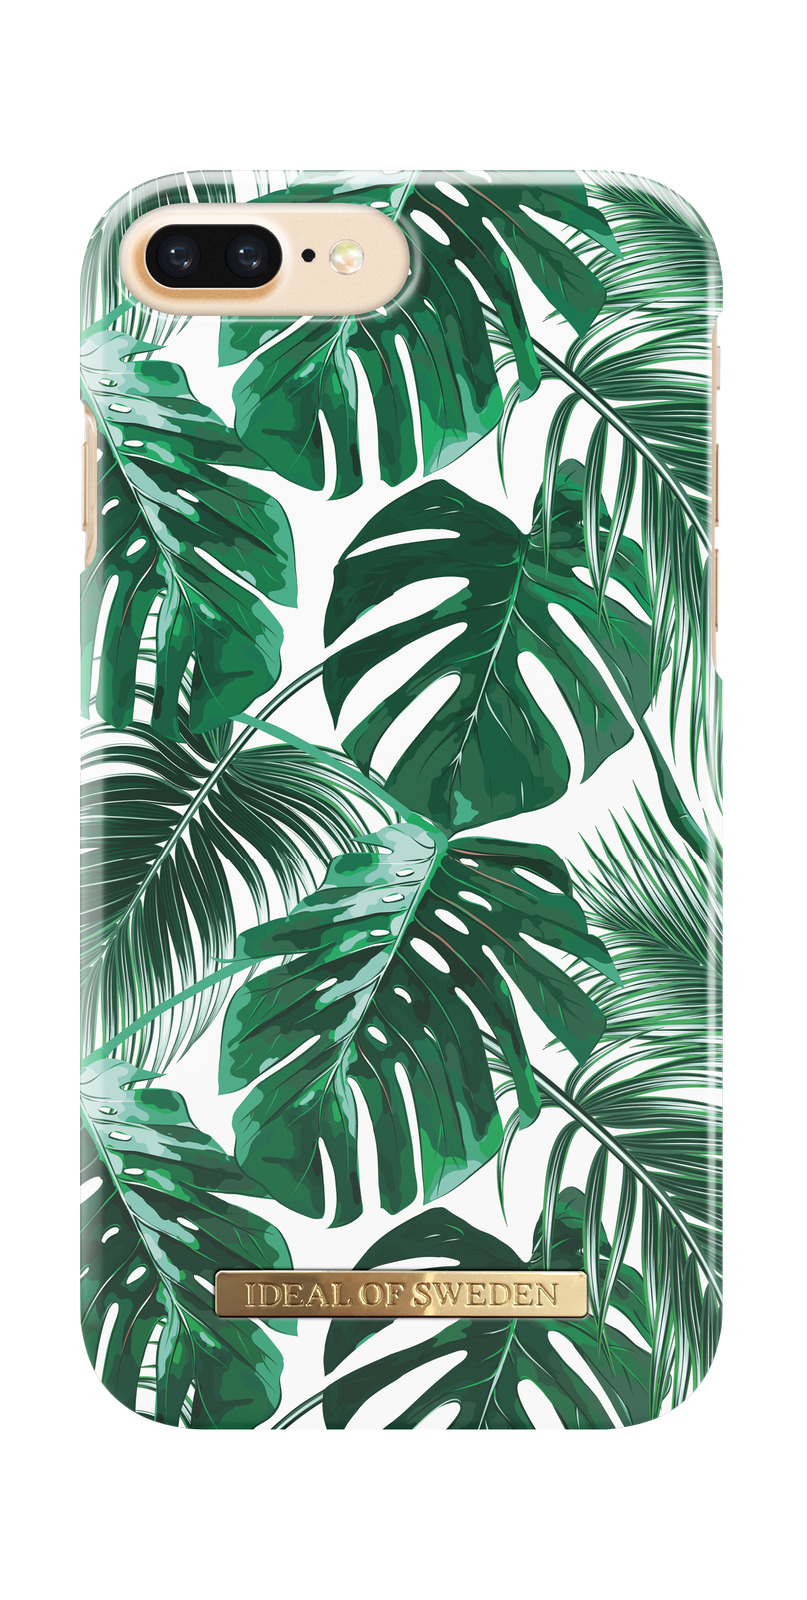 IDEAL OF SWEDEN Fashion, Jungle Backcover, 6 7 Plus, 8 Apple, ,iPhone iPhone Plus iPhone Monstera Plus